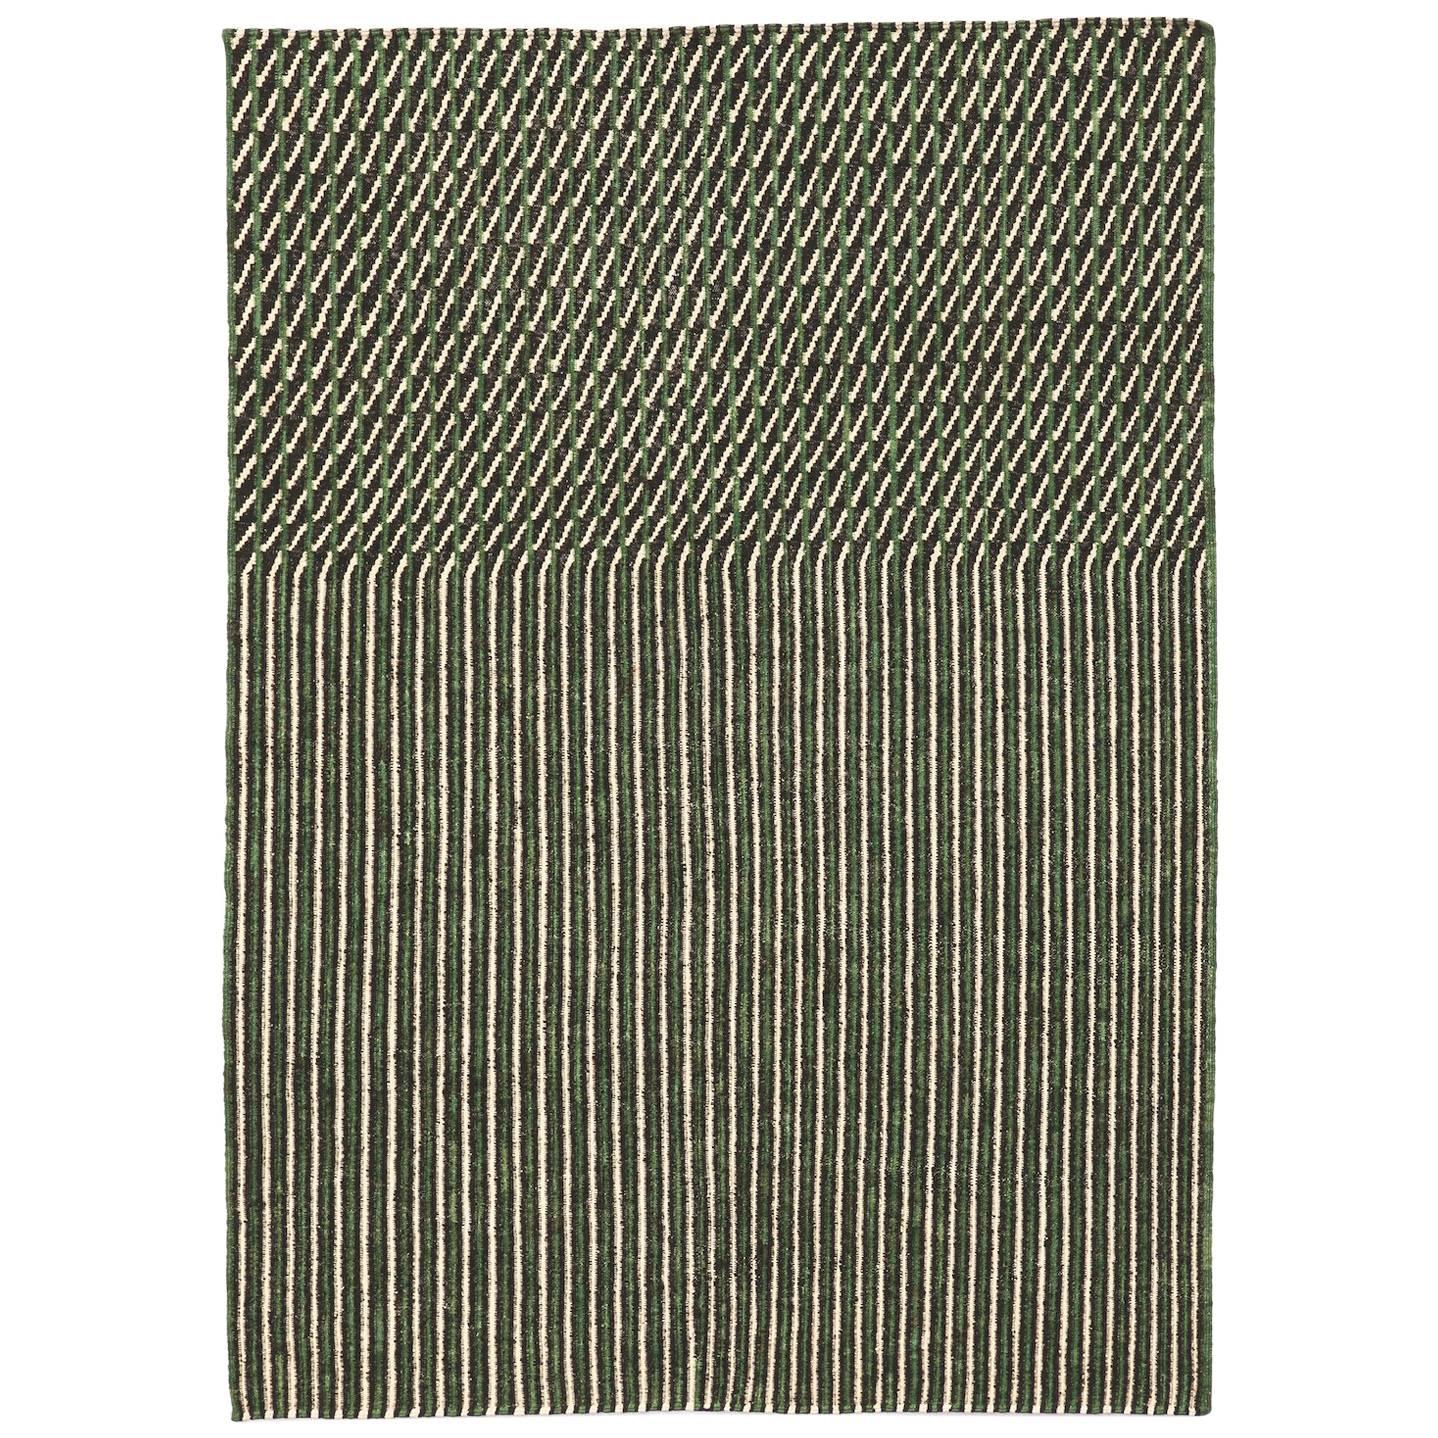 Hand-Spun Nanimarquina Blur Rug in Green by Ronan & Erwan Bouroullec, Small For Sale